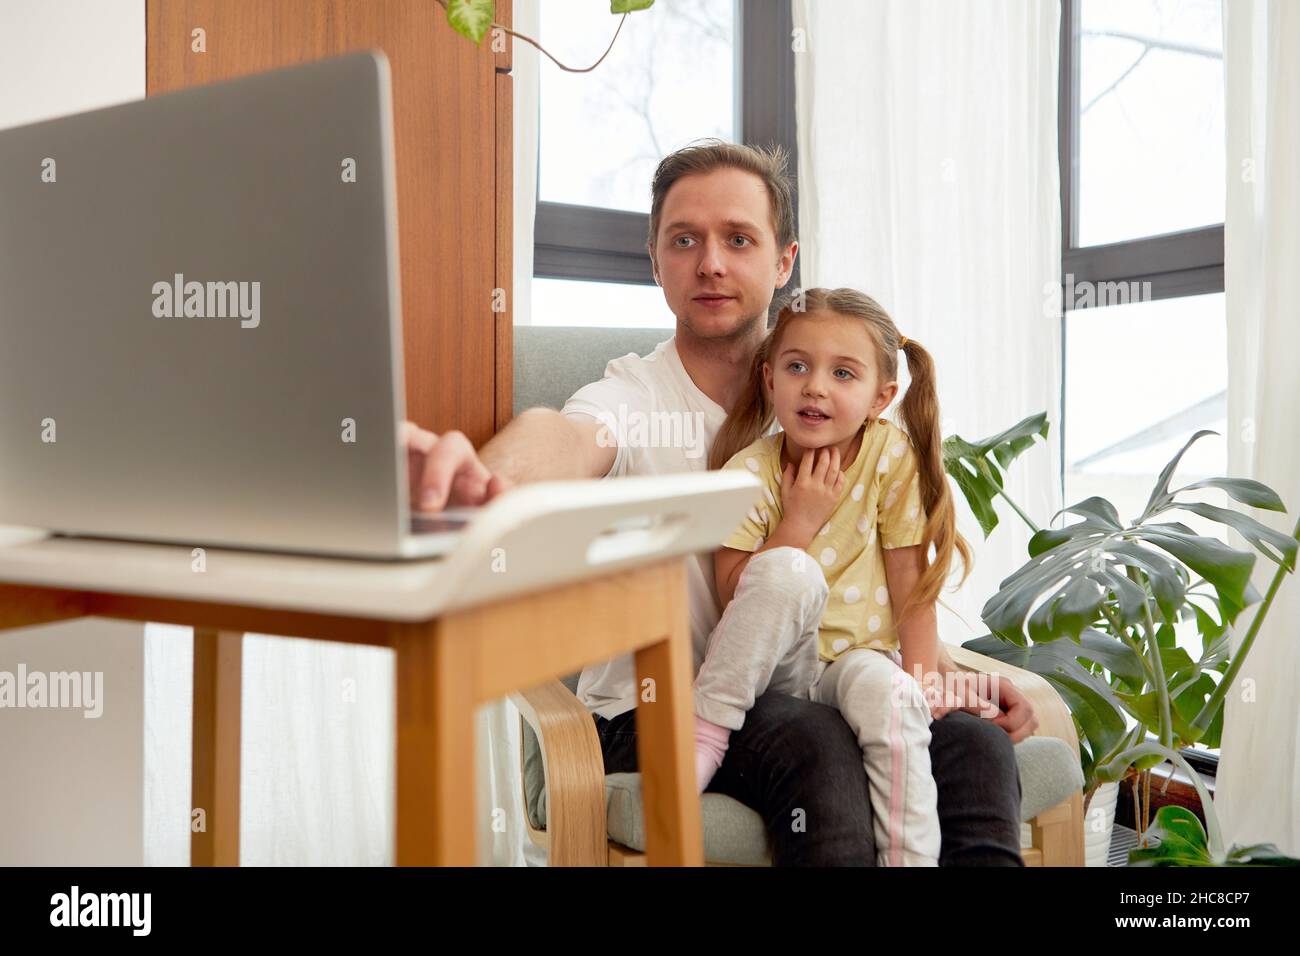 Education Concept. Happy father teaching his little toddler girl how to use personal computer, copy space Stock Photo